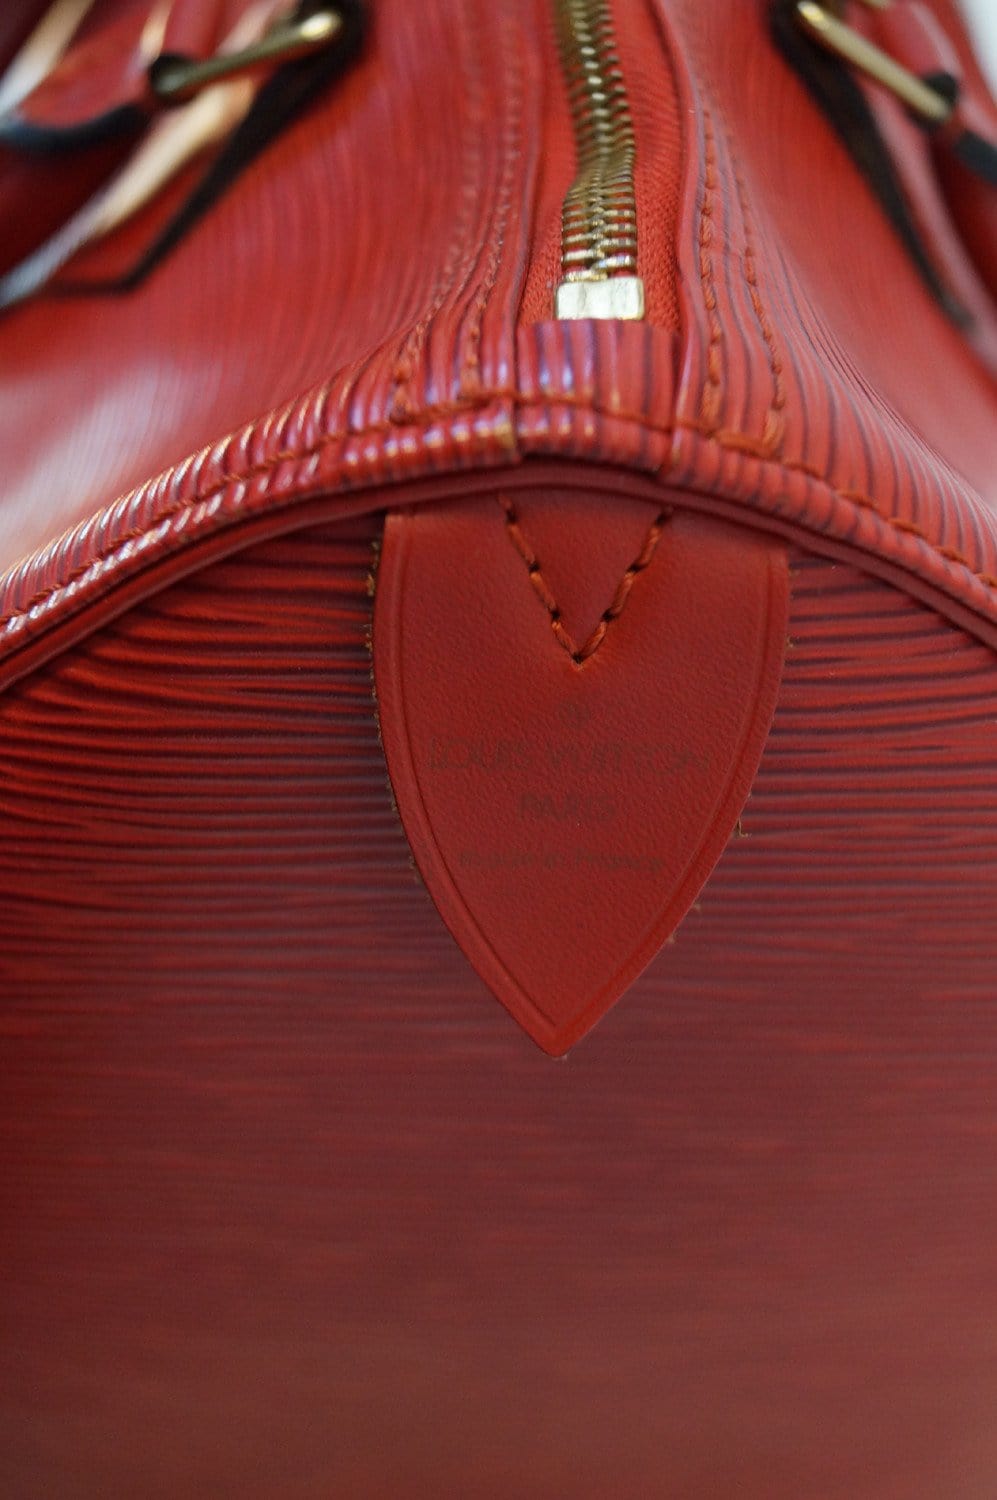 Louis Vuitton Red Epi Leather Business Bag